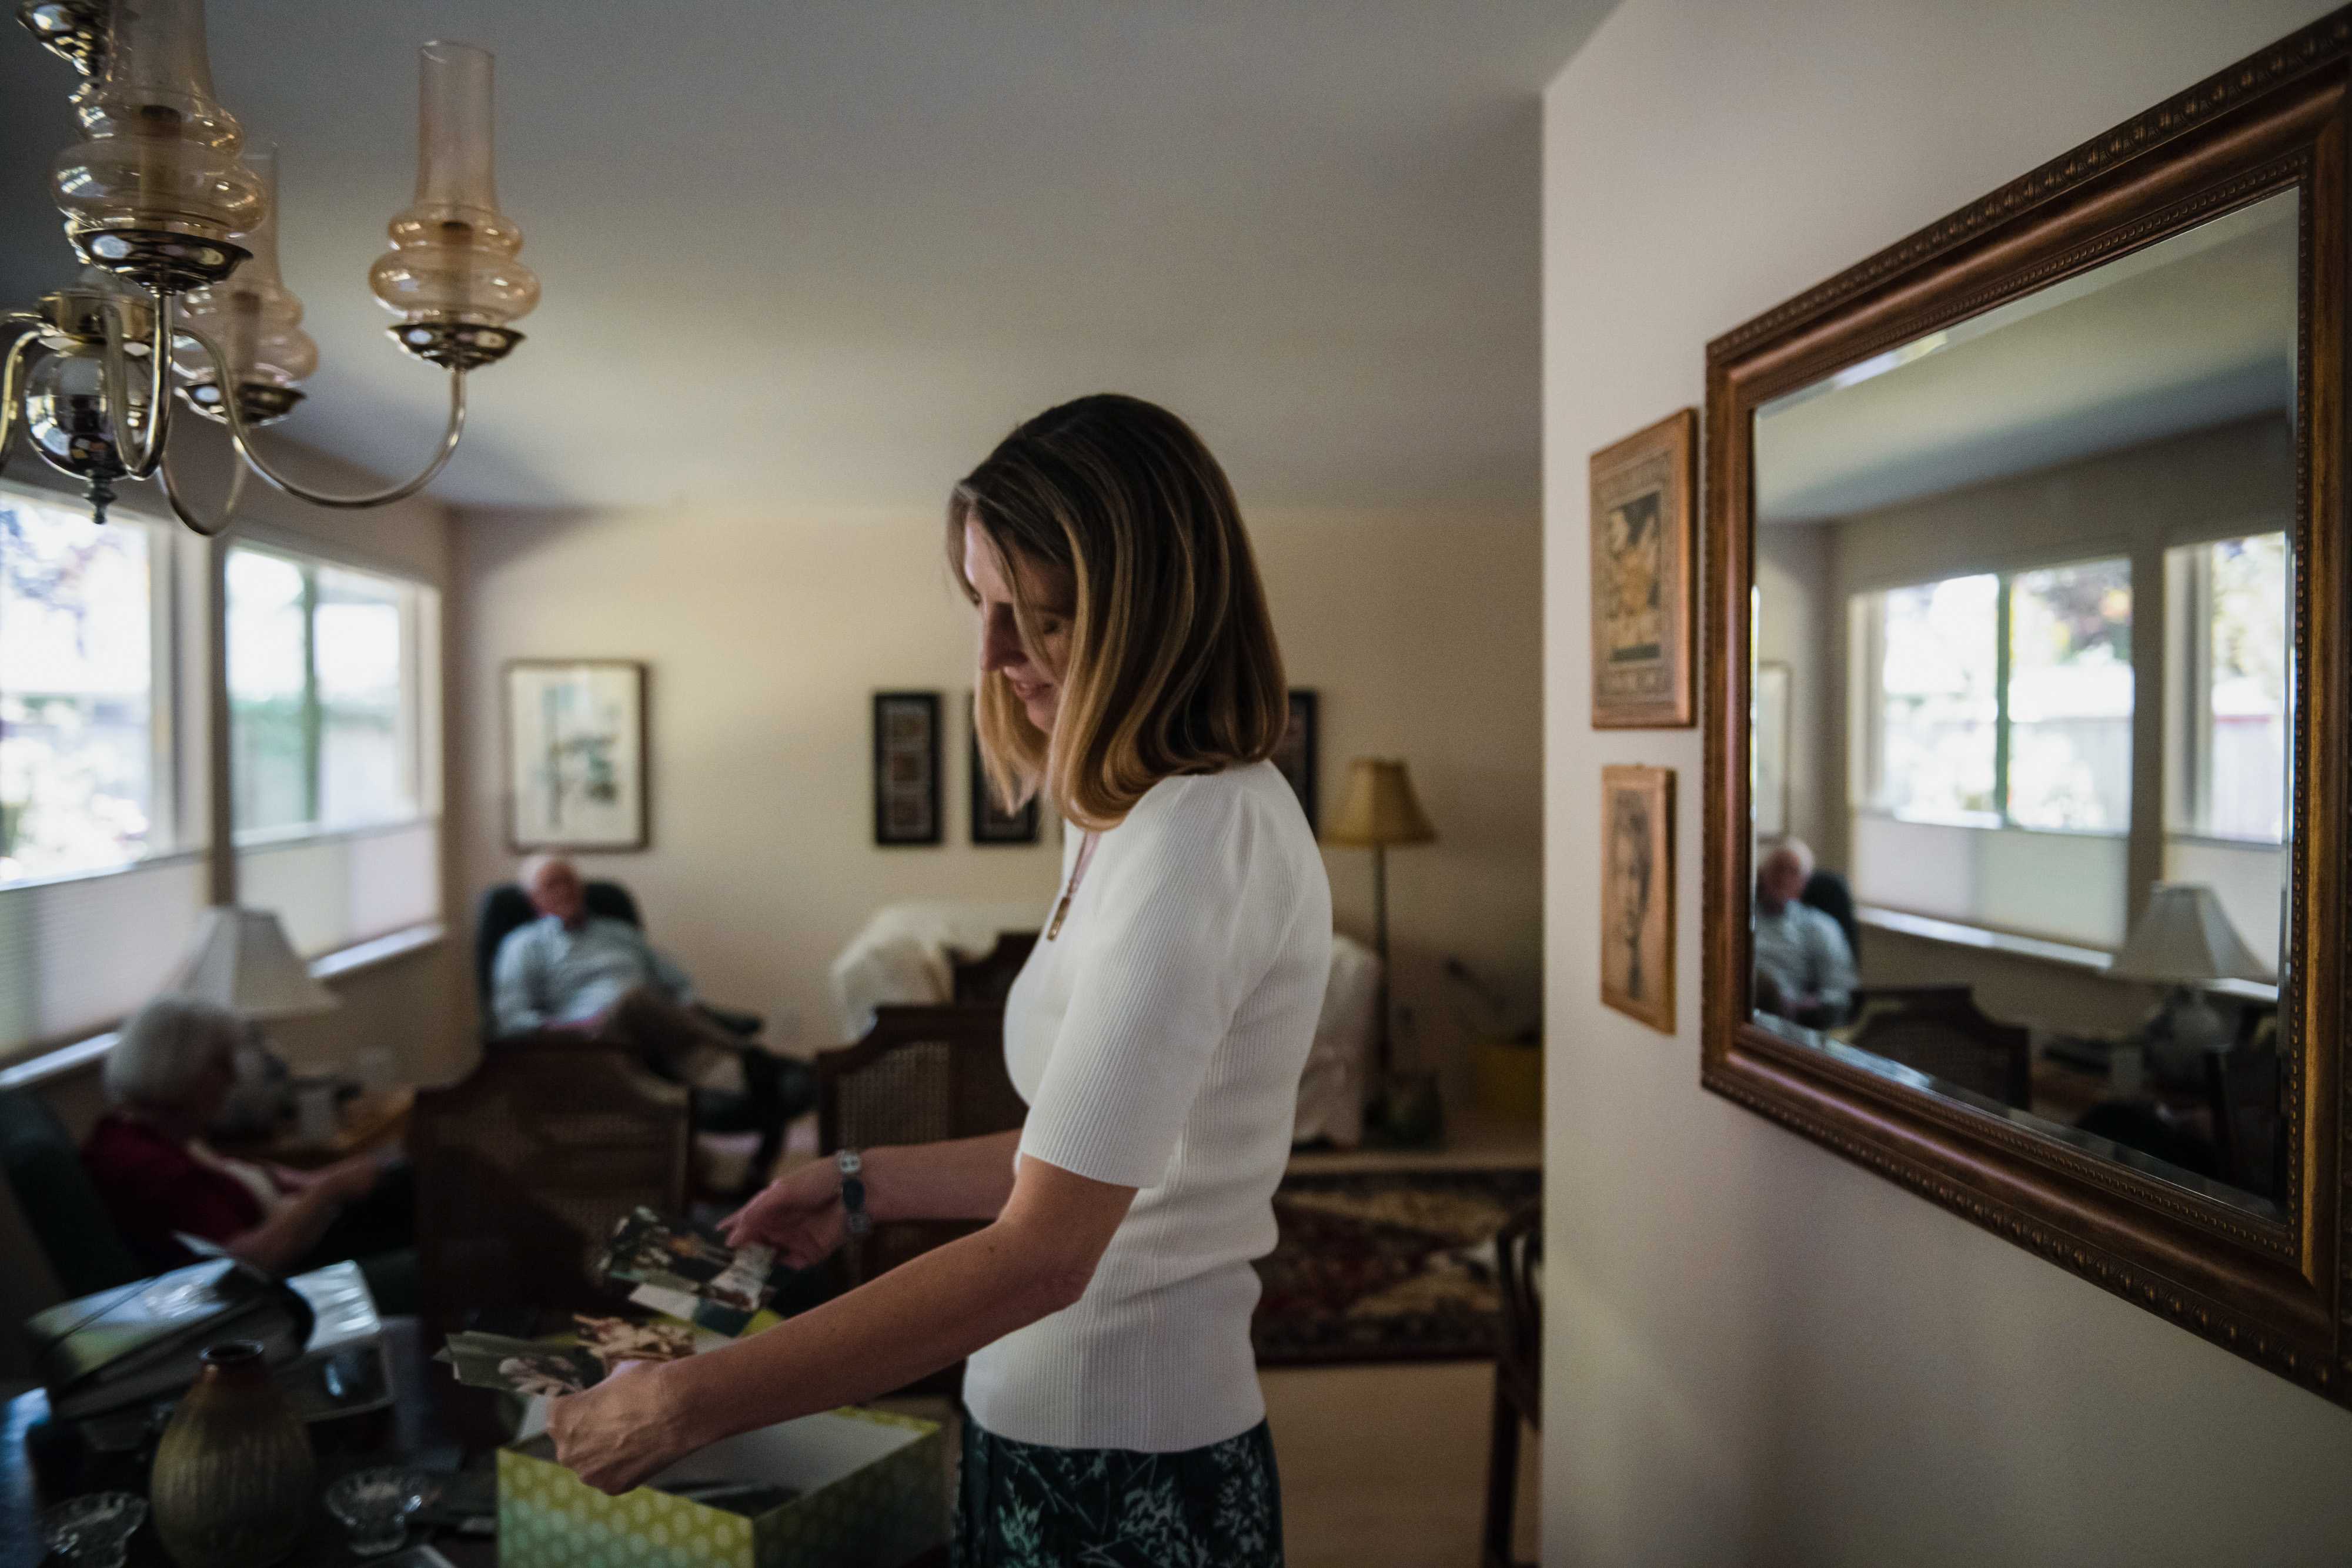 Sarah Corrie sifts through old photos of her sister Rachel at home in Olympia, WA July 10, 2022. Kholood Eid for The Intercept